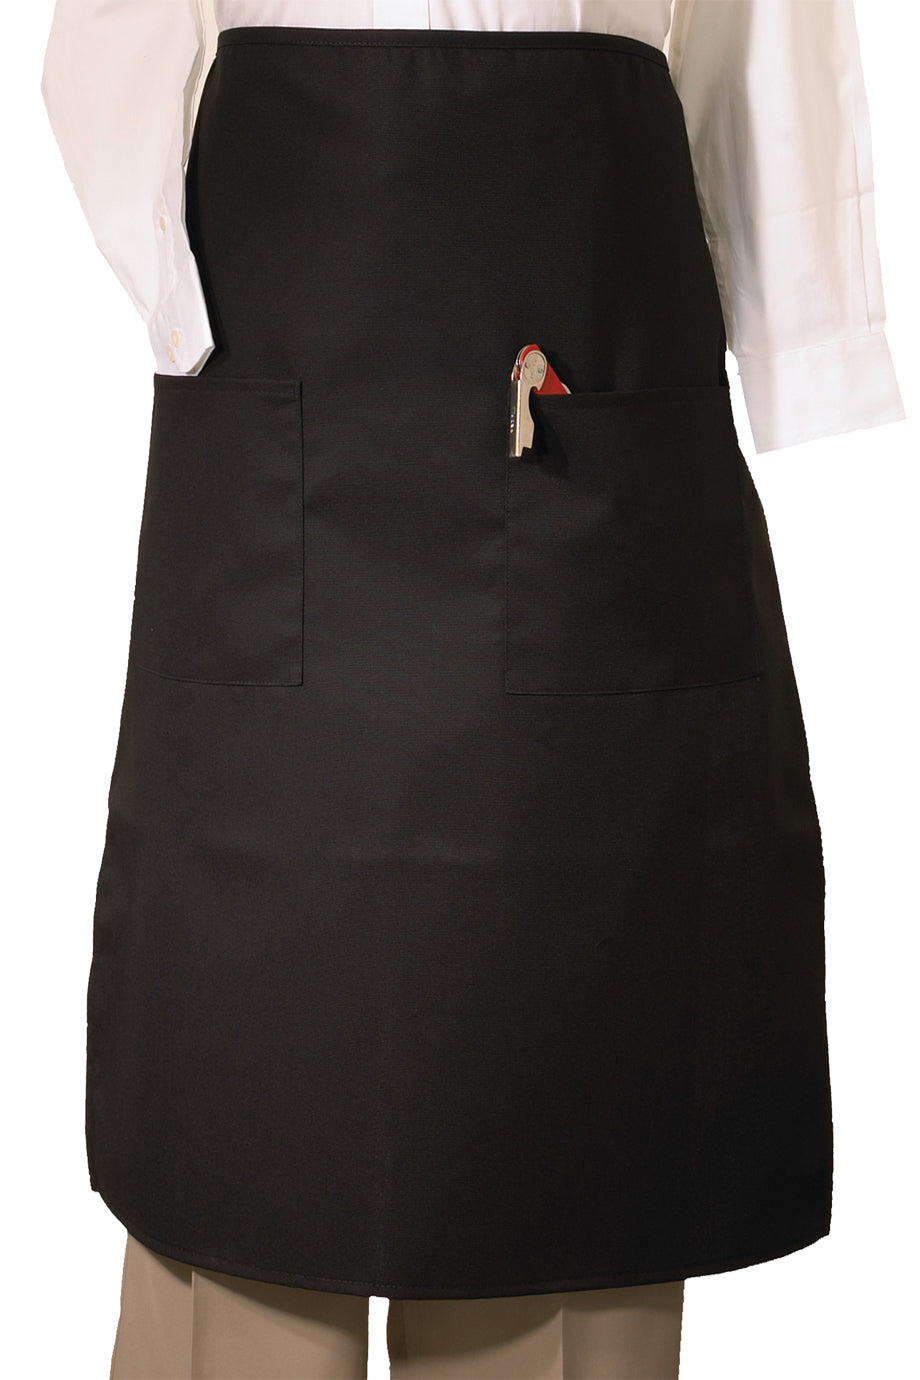 Bistro Apron With Two Pockets